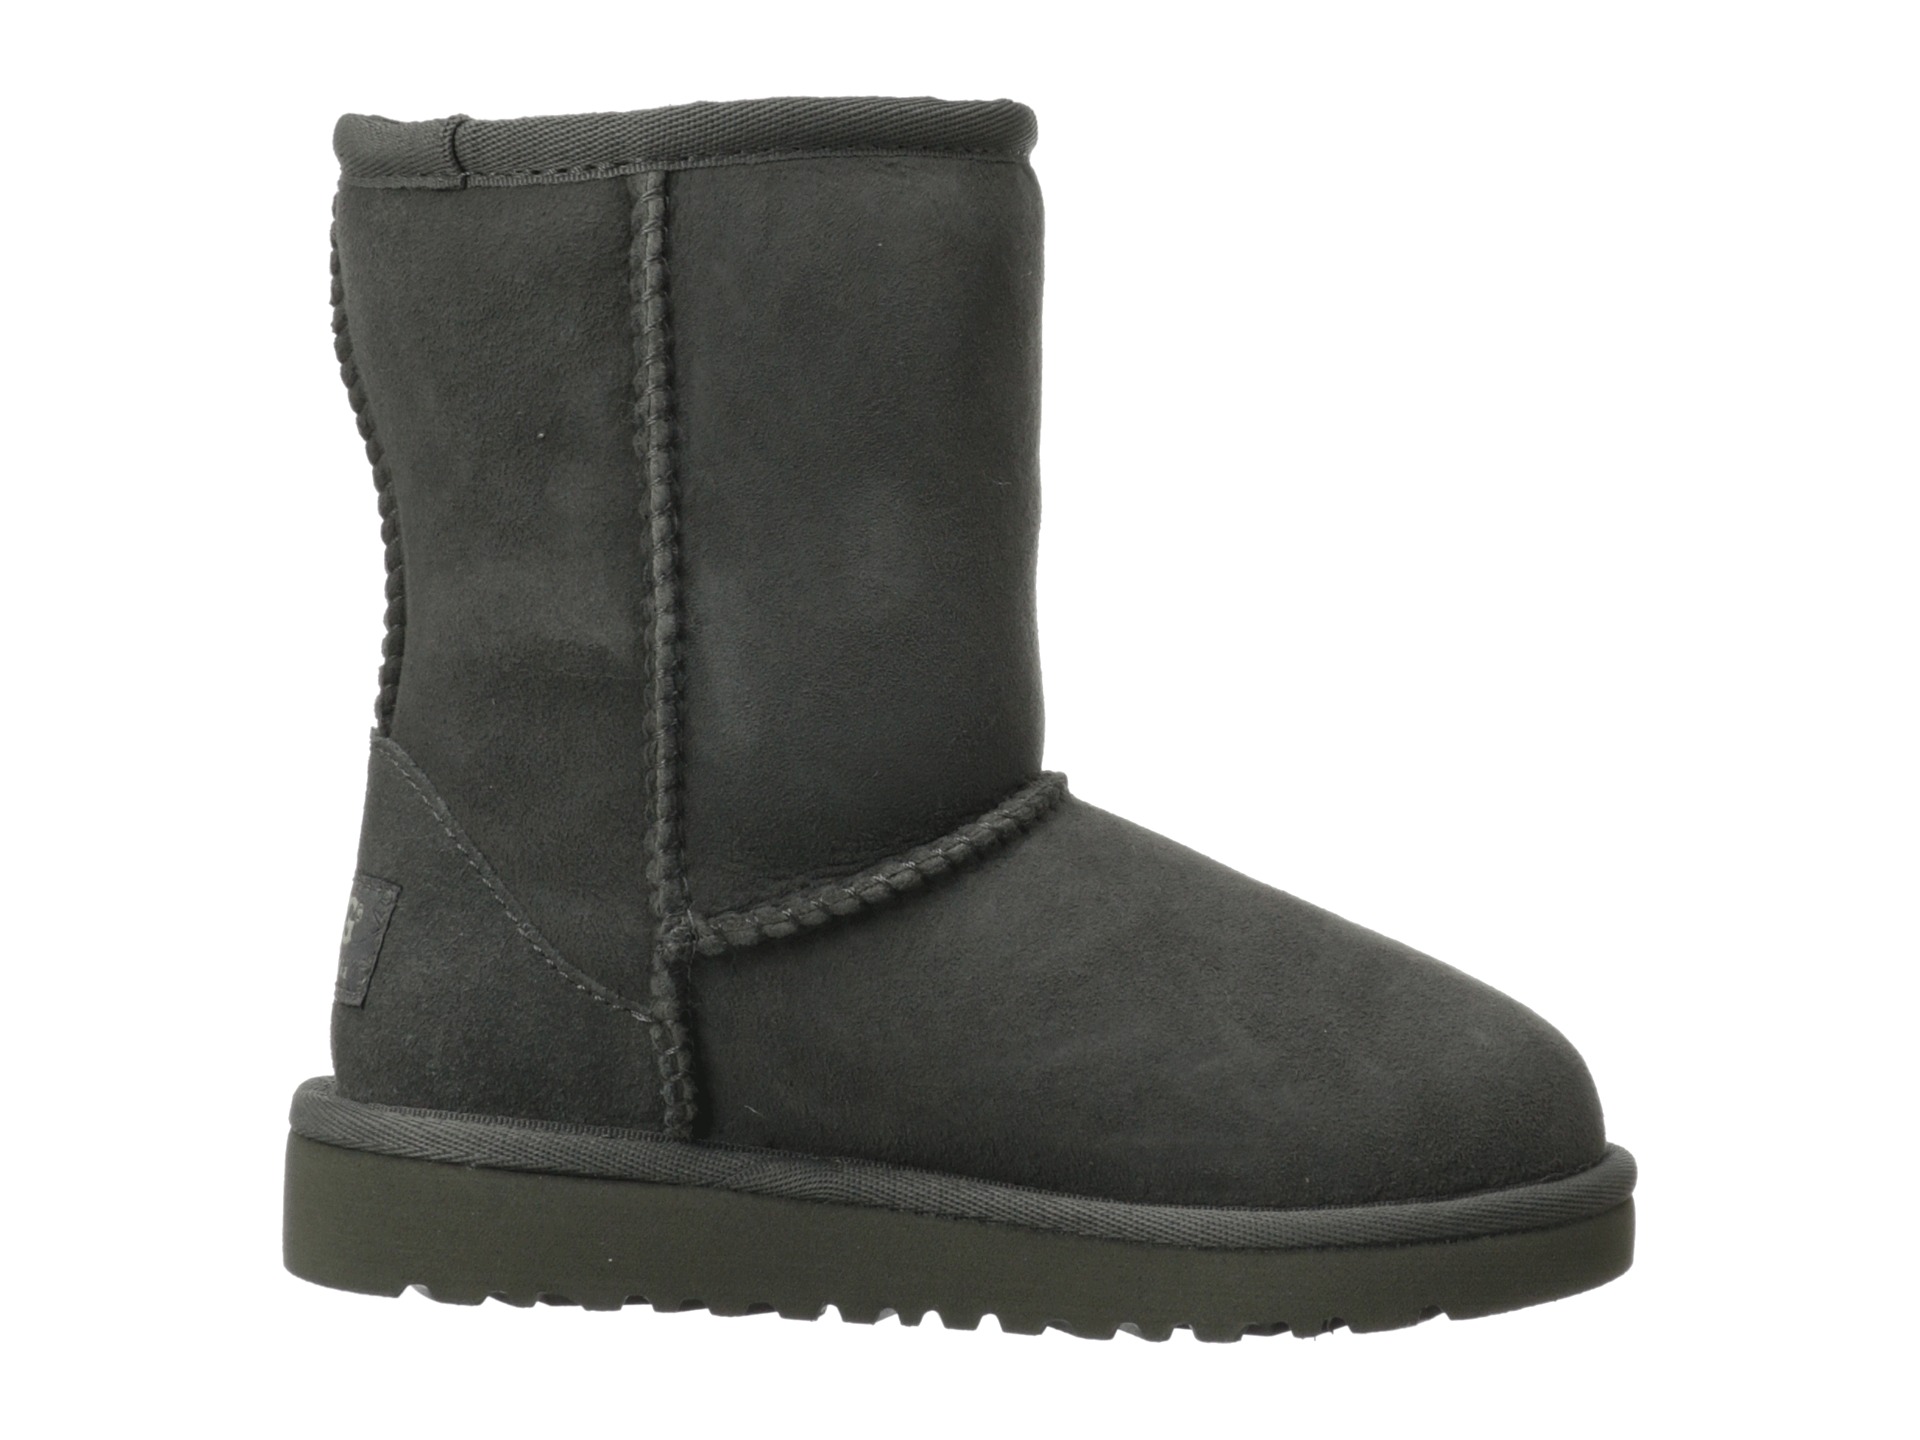 UGG Kids Classic (Toddler/Little Kid) at Zappos.com